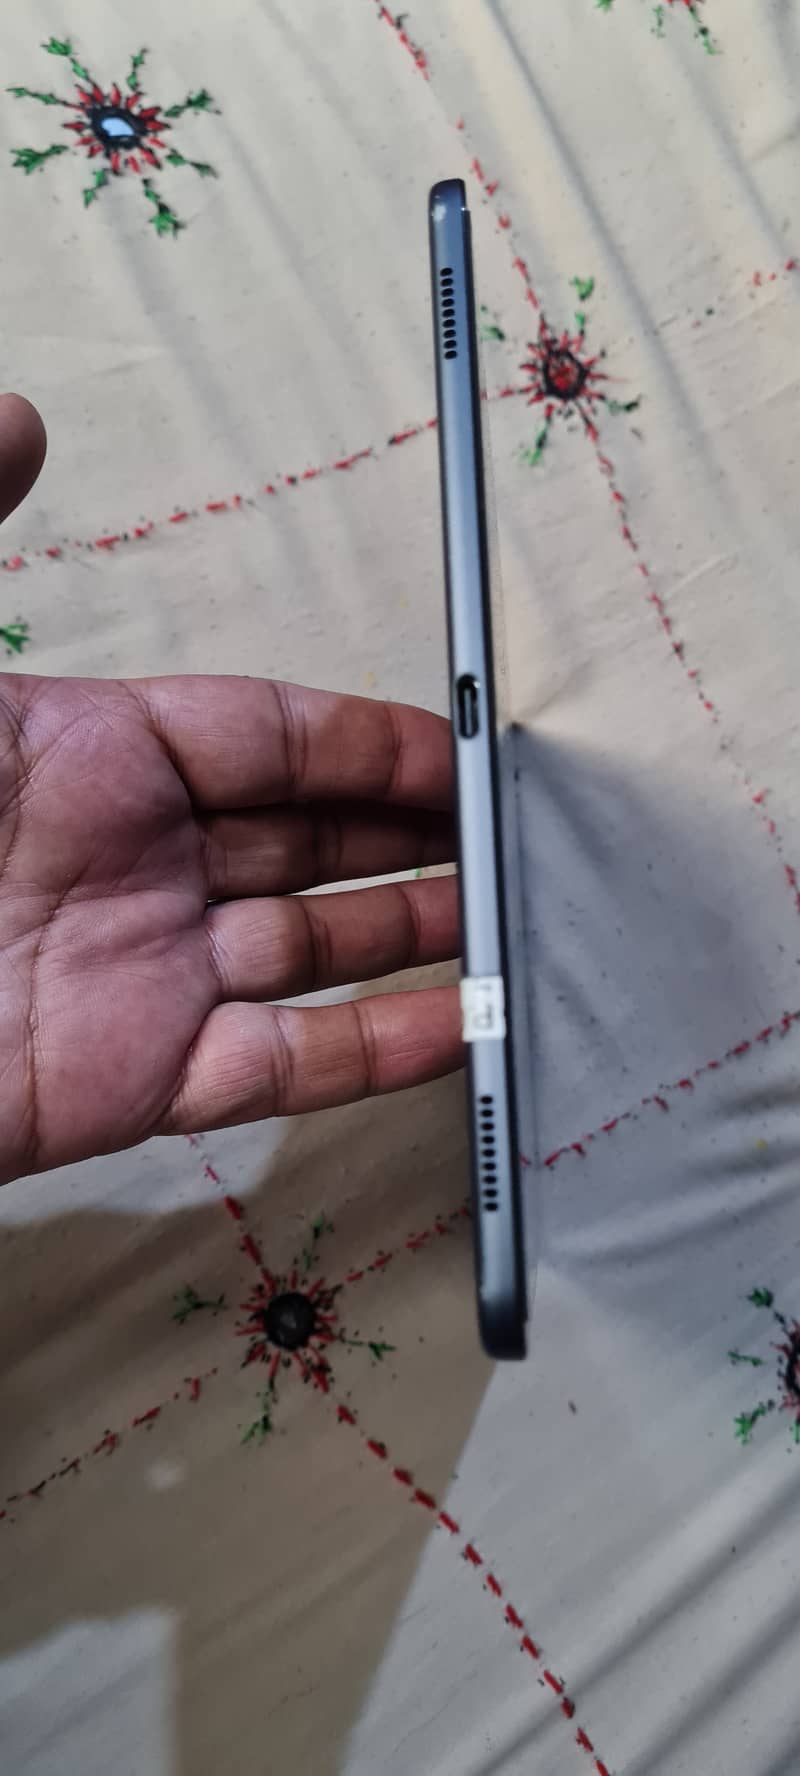 Samsung flagship tab S5e. . 10 by 10 condition 8